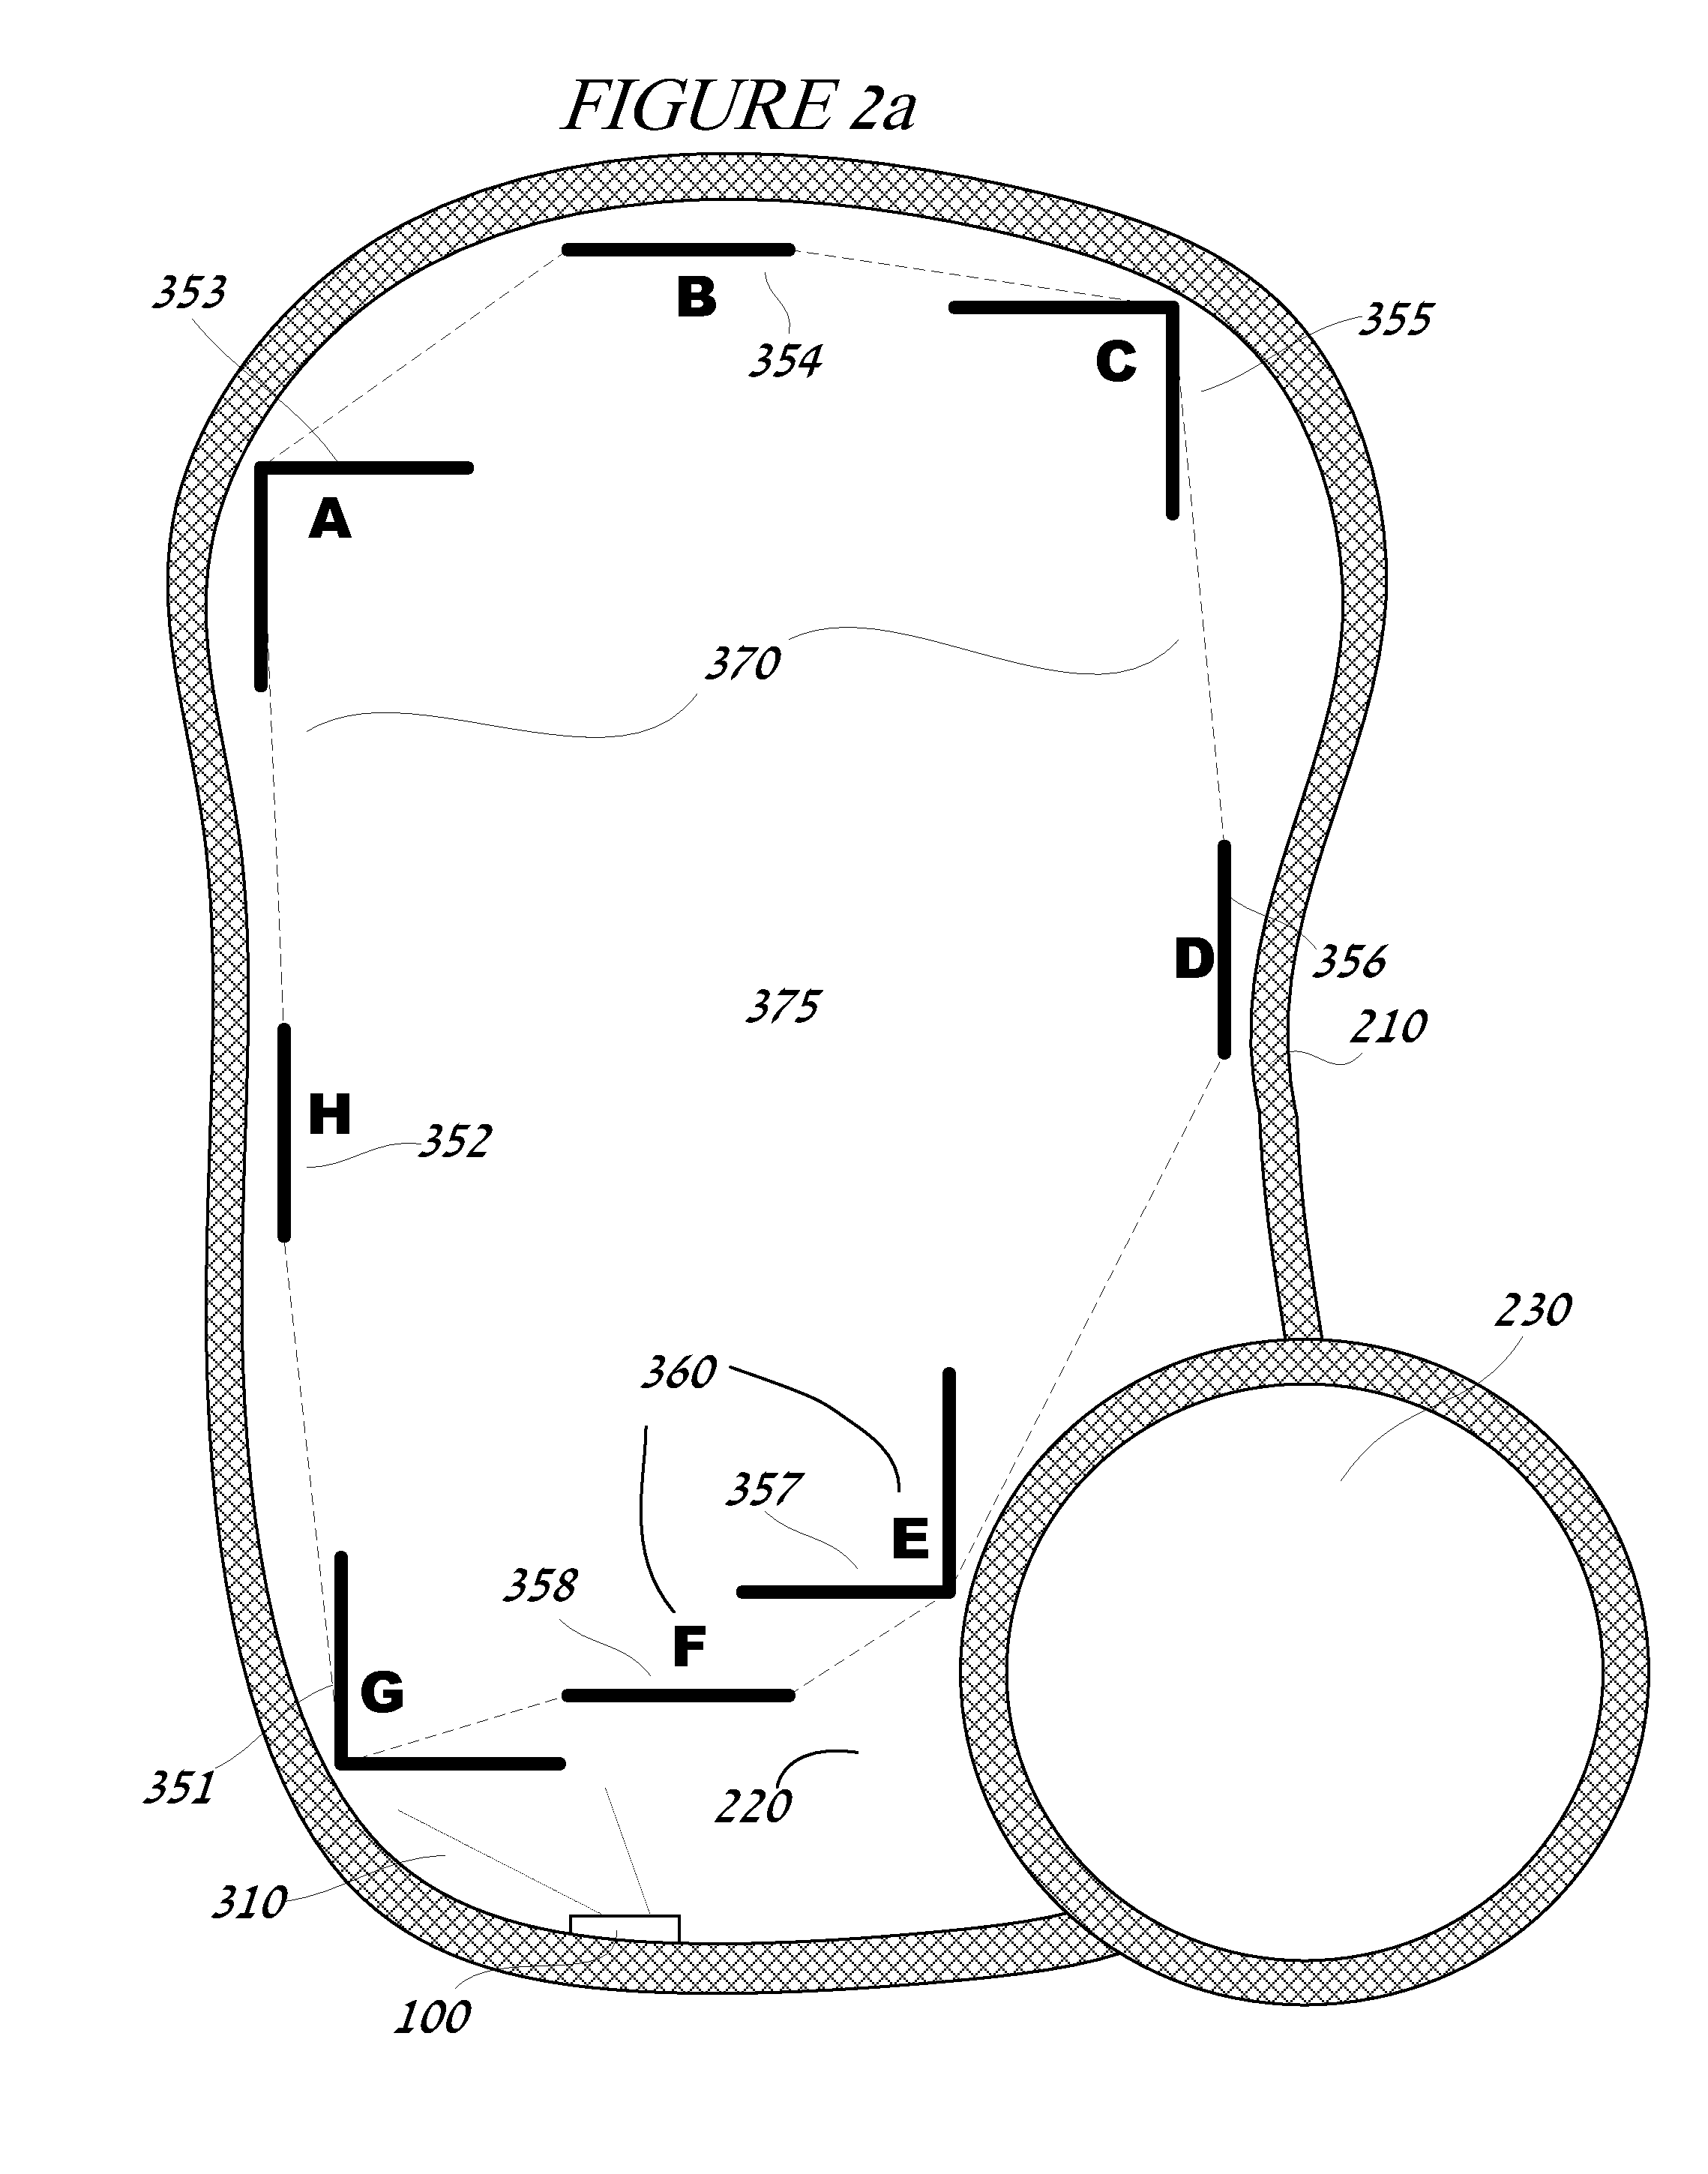 Underwater image projection controller with boundary setting and image correction modules and interface and method of using same